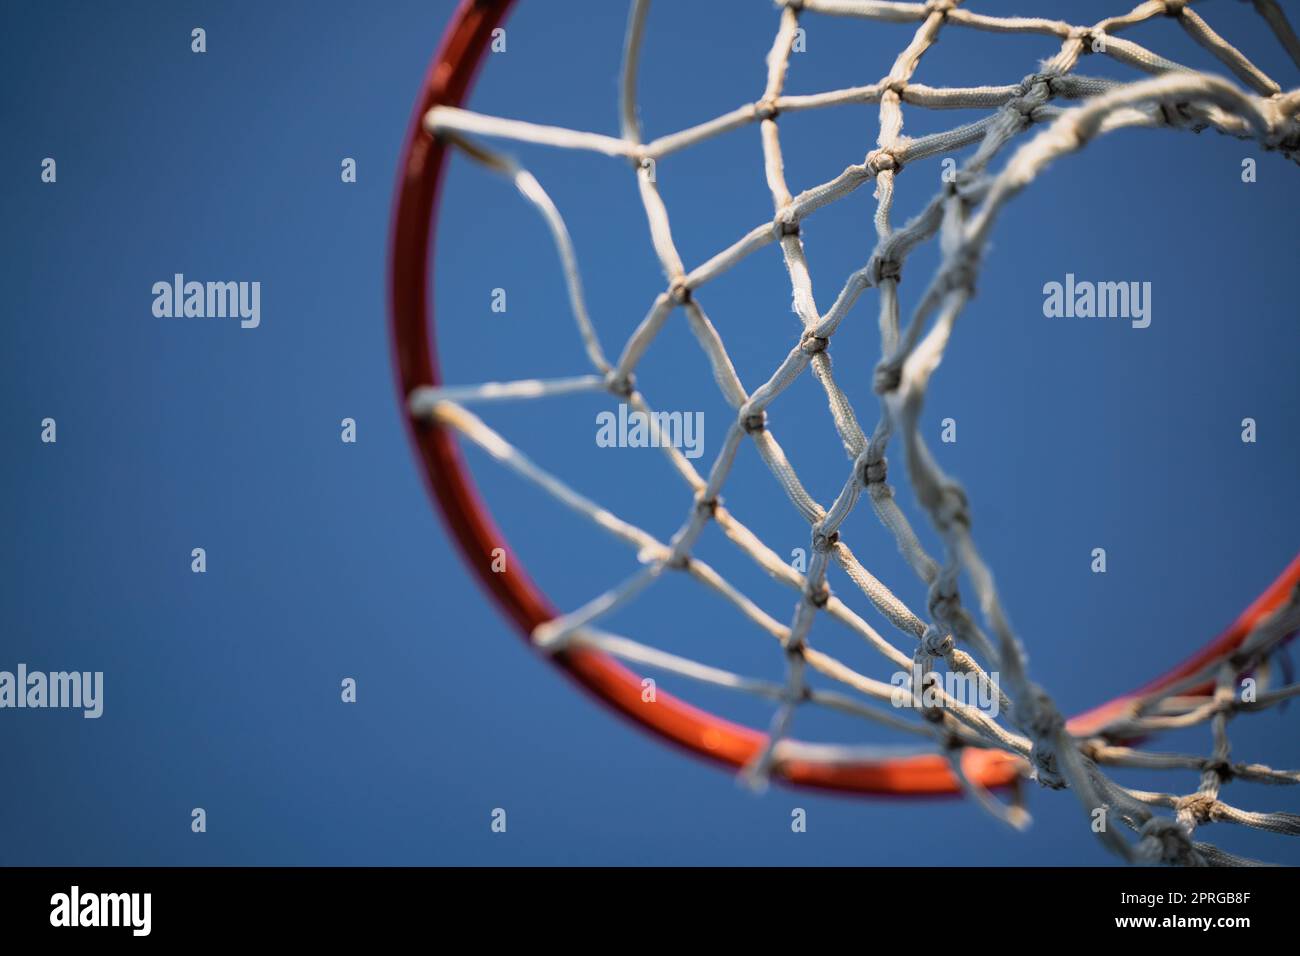 closeup of outdoor basketball basket net of white rope view from underneath against a blue sky with copyspace Stock Photo